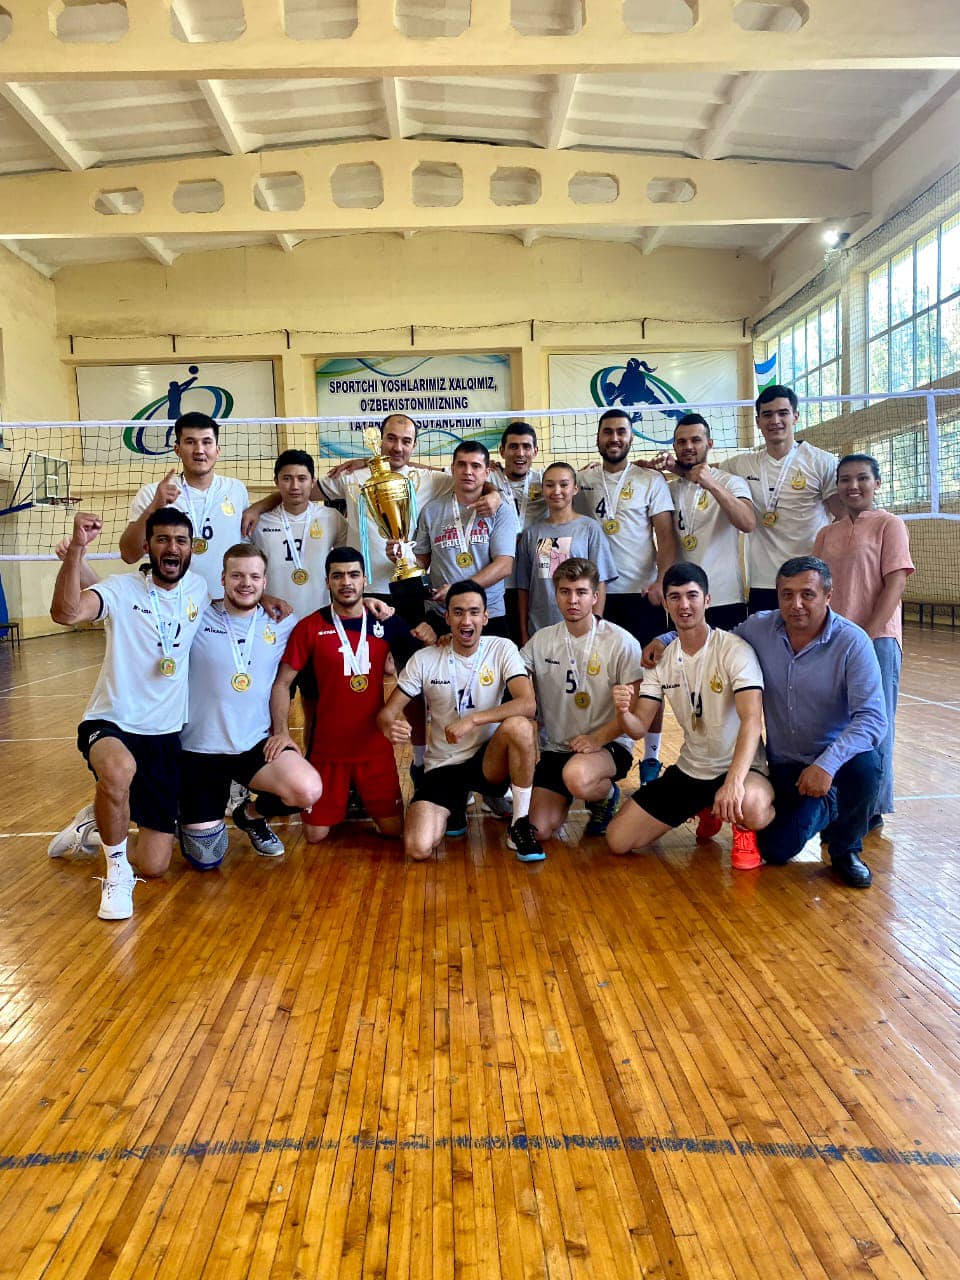 AGMK, NDPI REIGN SUPREME AT MEN’S AND WOMEN’S VOLLEYBALL CHAMPIONSHIPS OF UZBEKISTAN